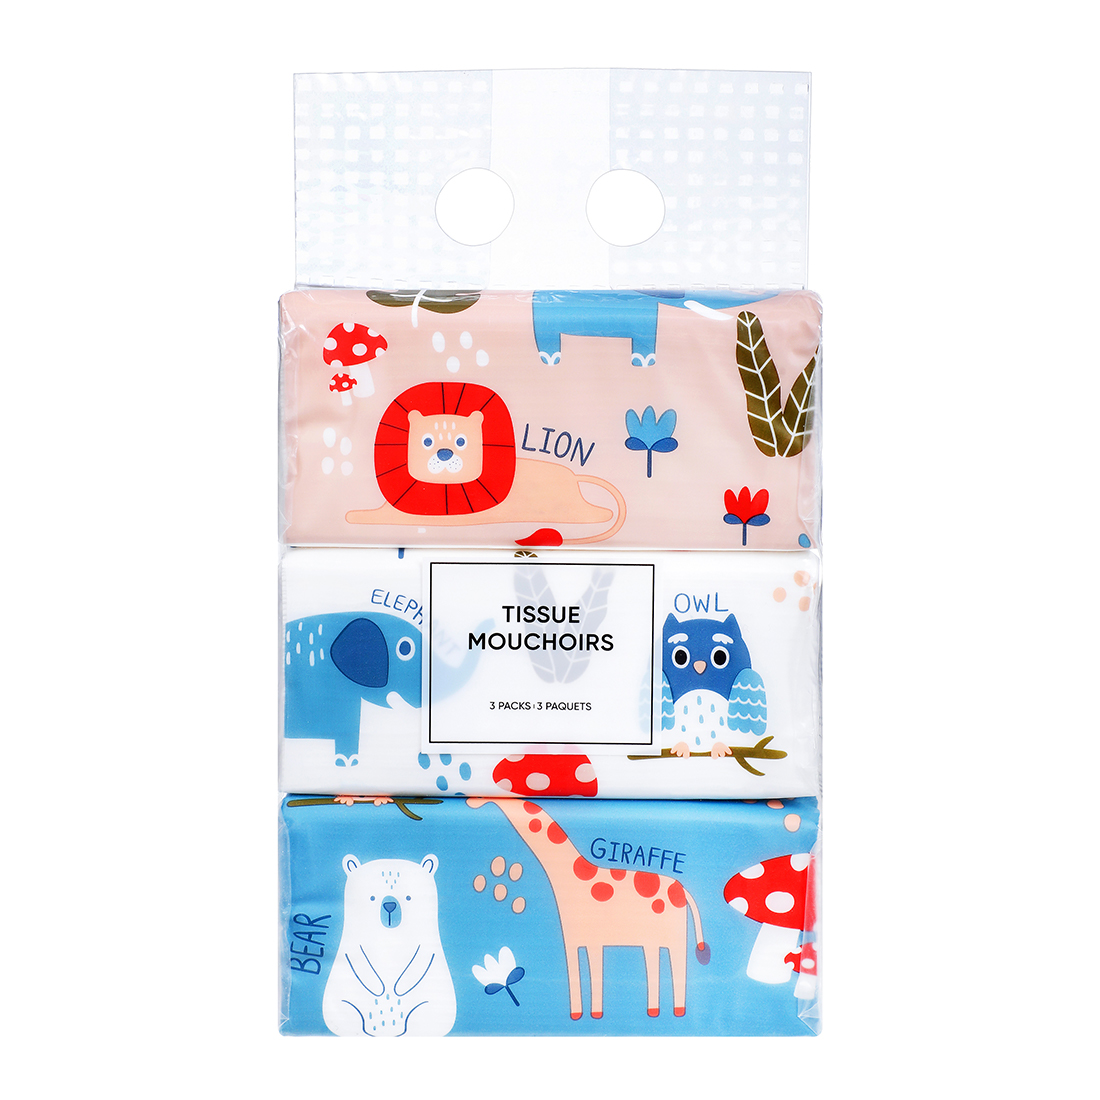 MINISO Facial Tissue Soft Comfort Tissues Papers 3 Packs 